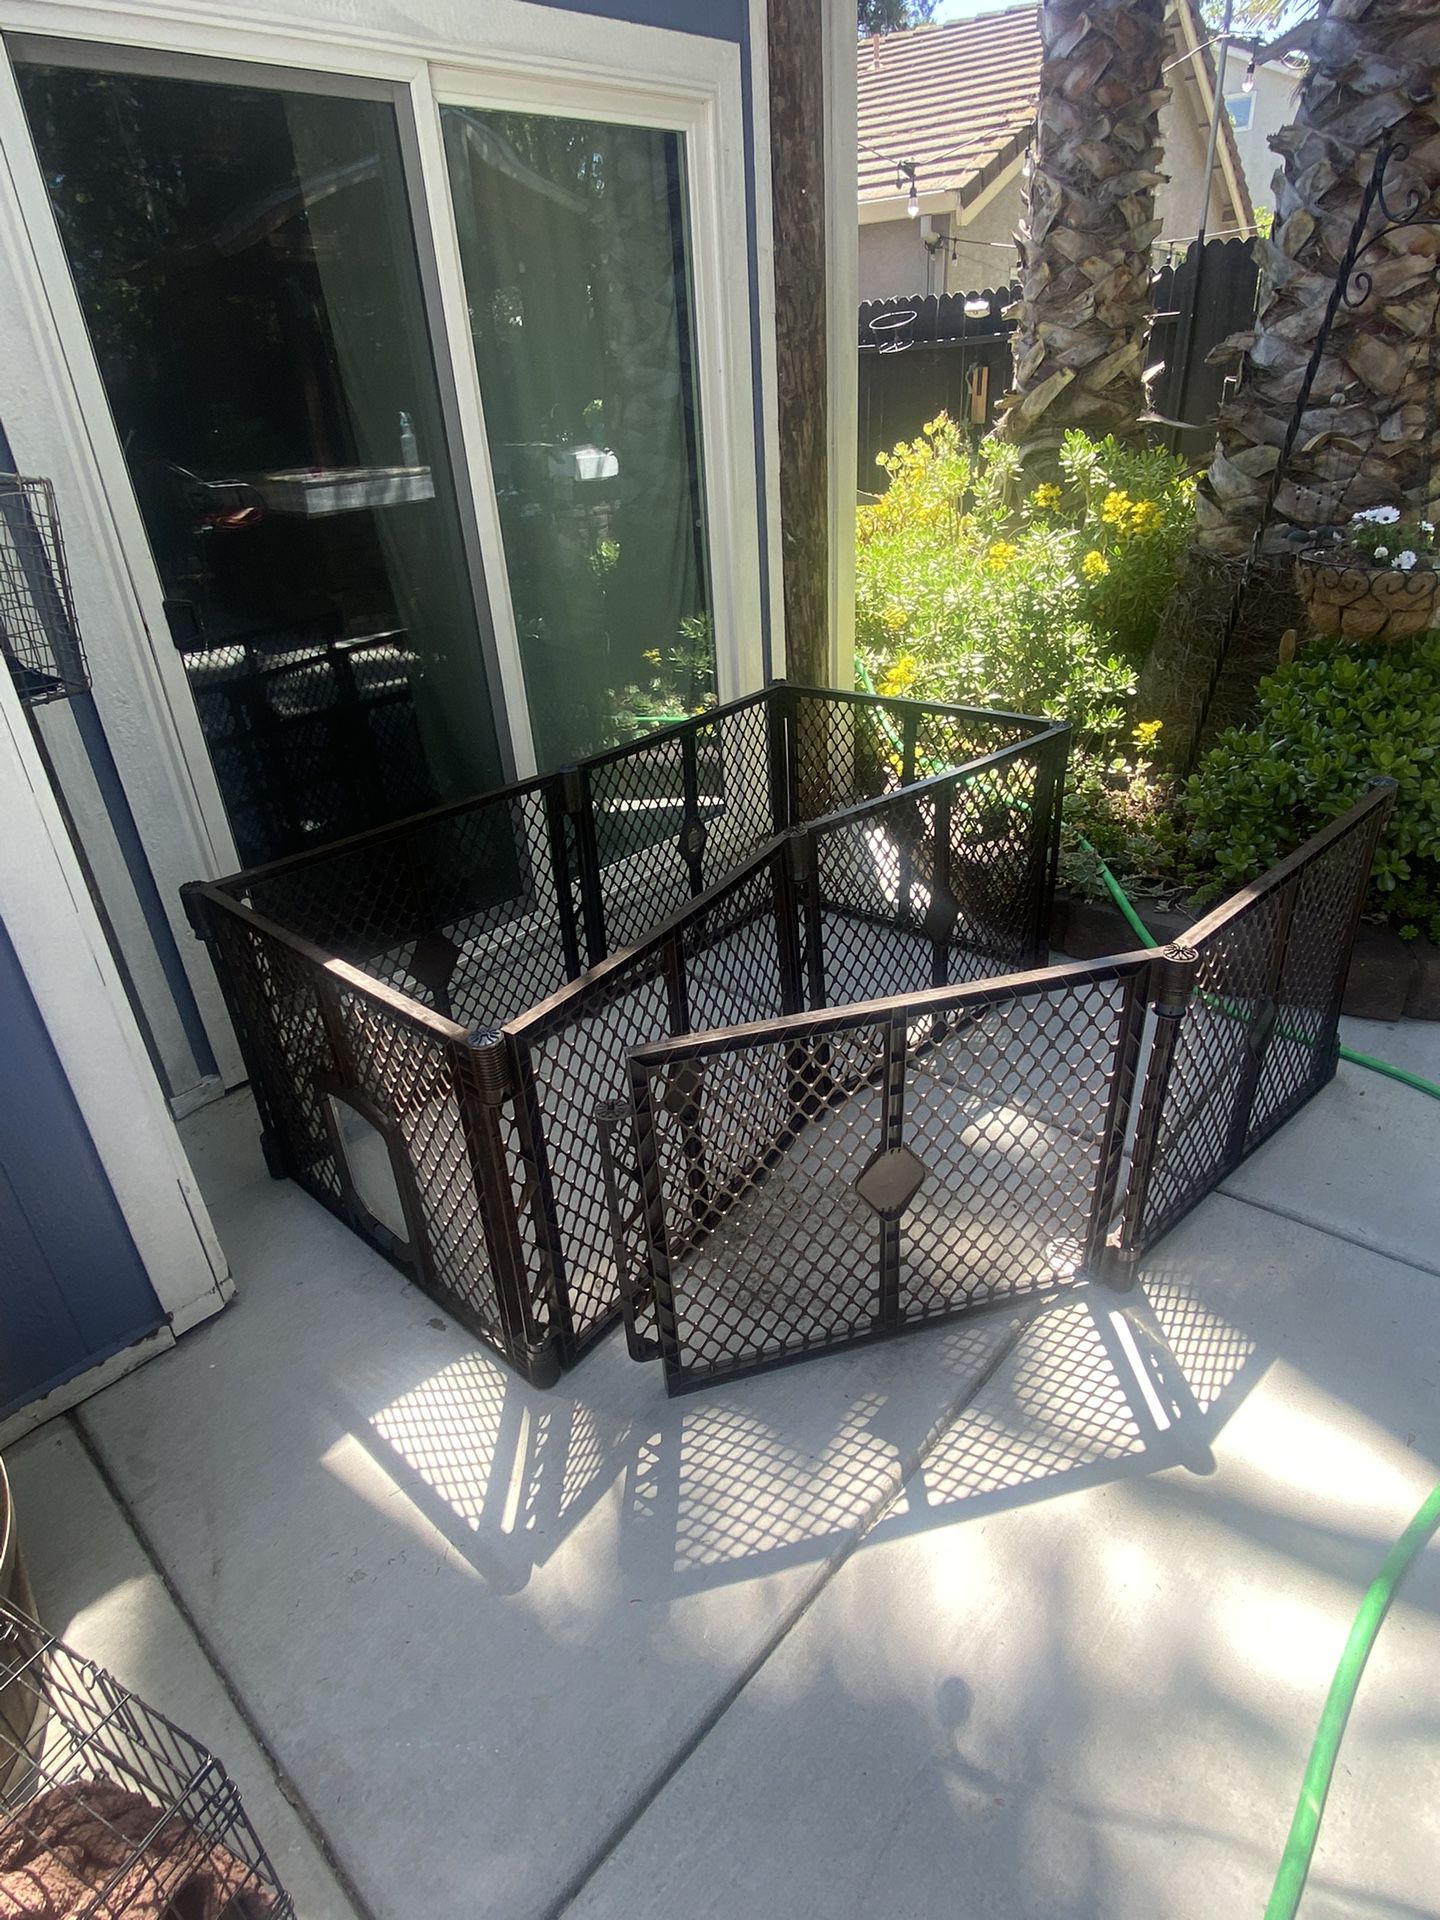 Dog Gate Great Condition 